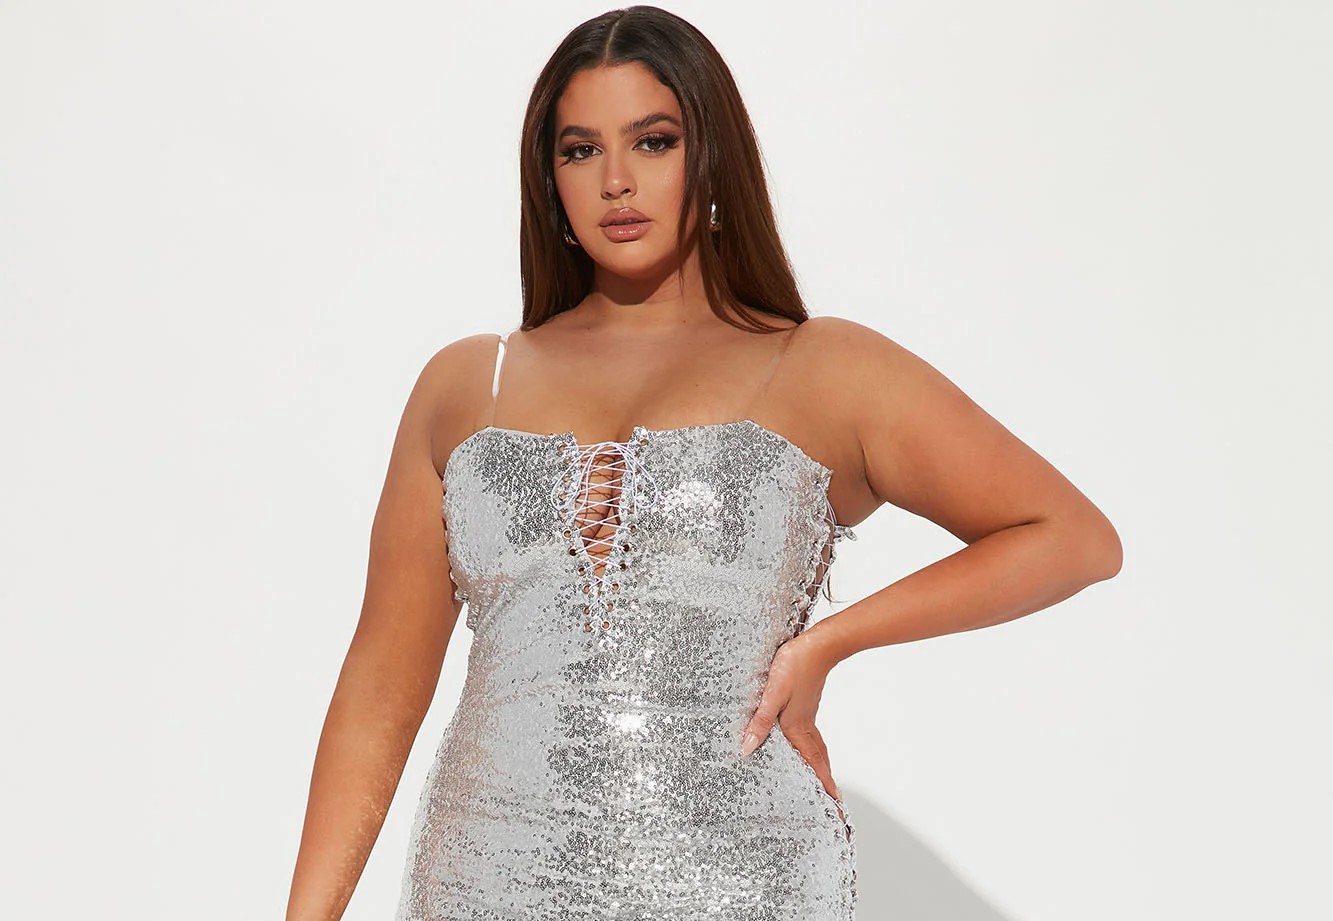 Fashion Nova's sequin lace-up dress sparks mockery online for its 'DIY assembly' look, likened to IKEA furniture. Discover the controversial £49 dress that has shoppers talking.